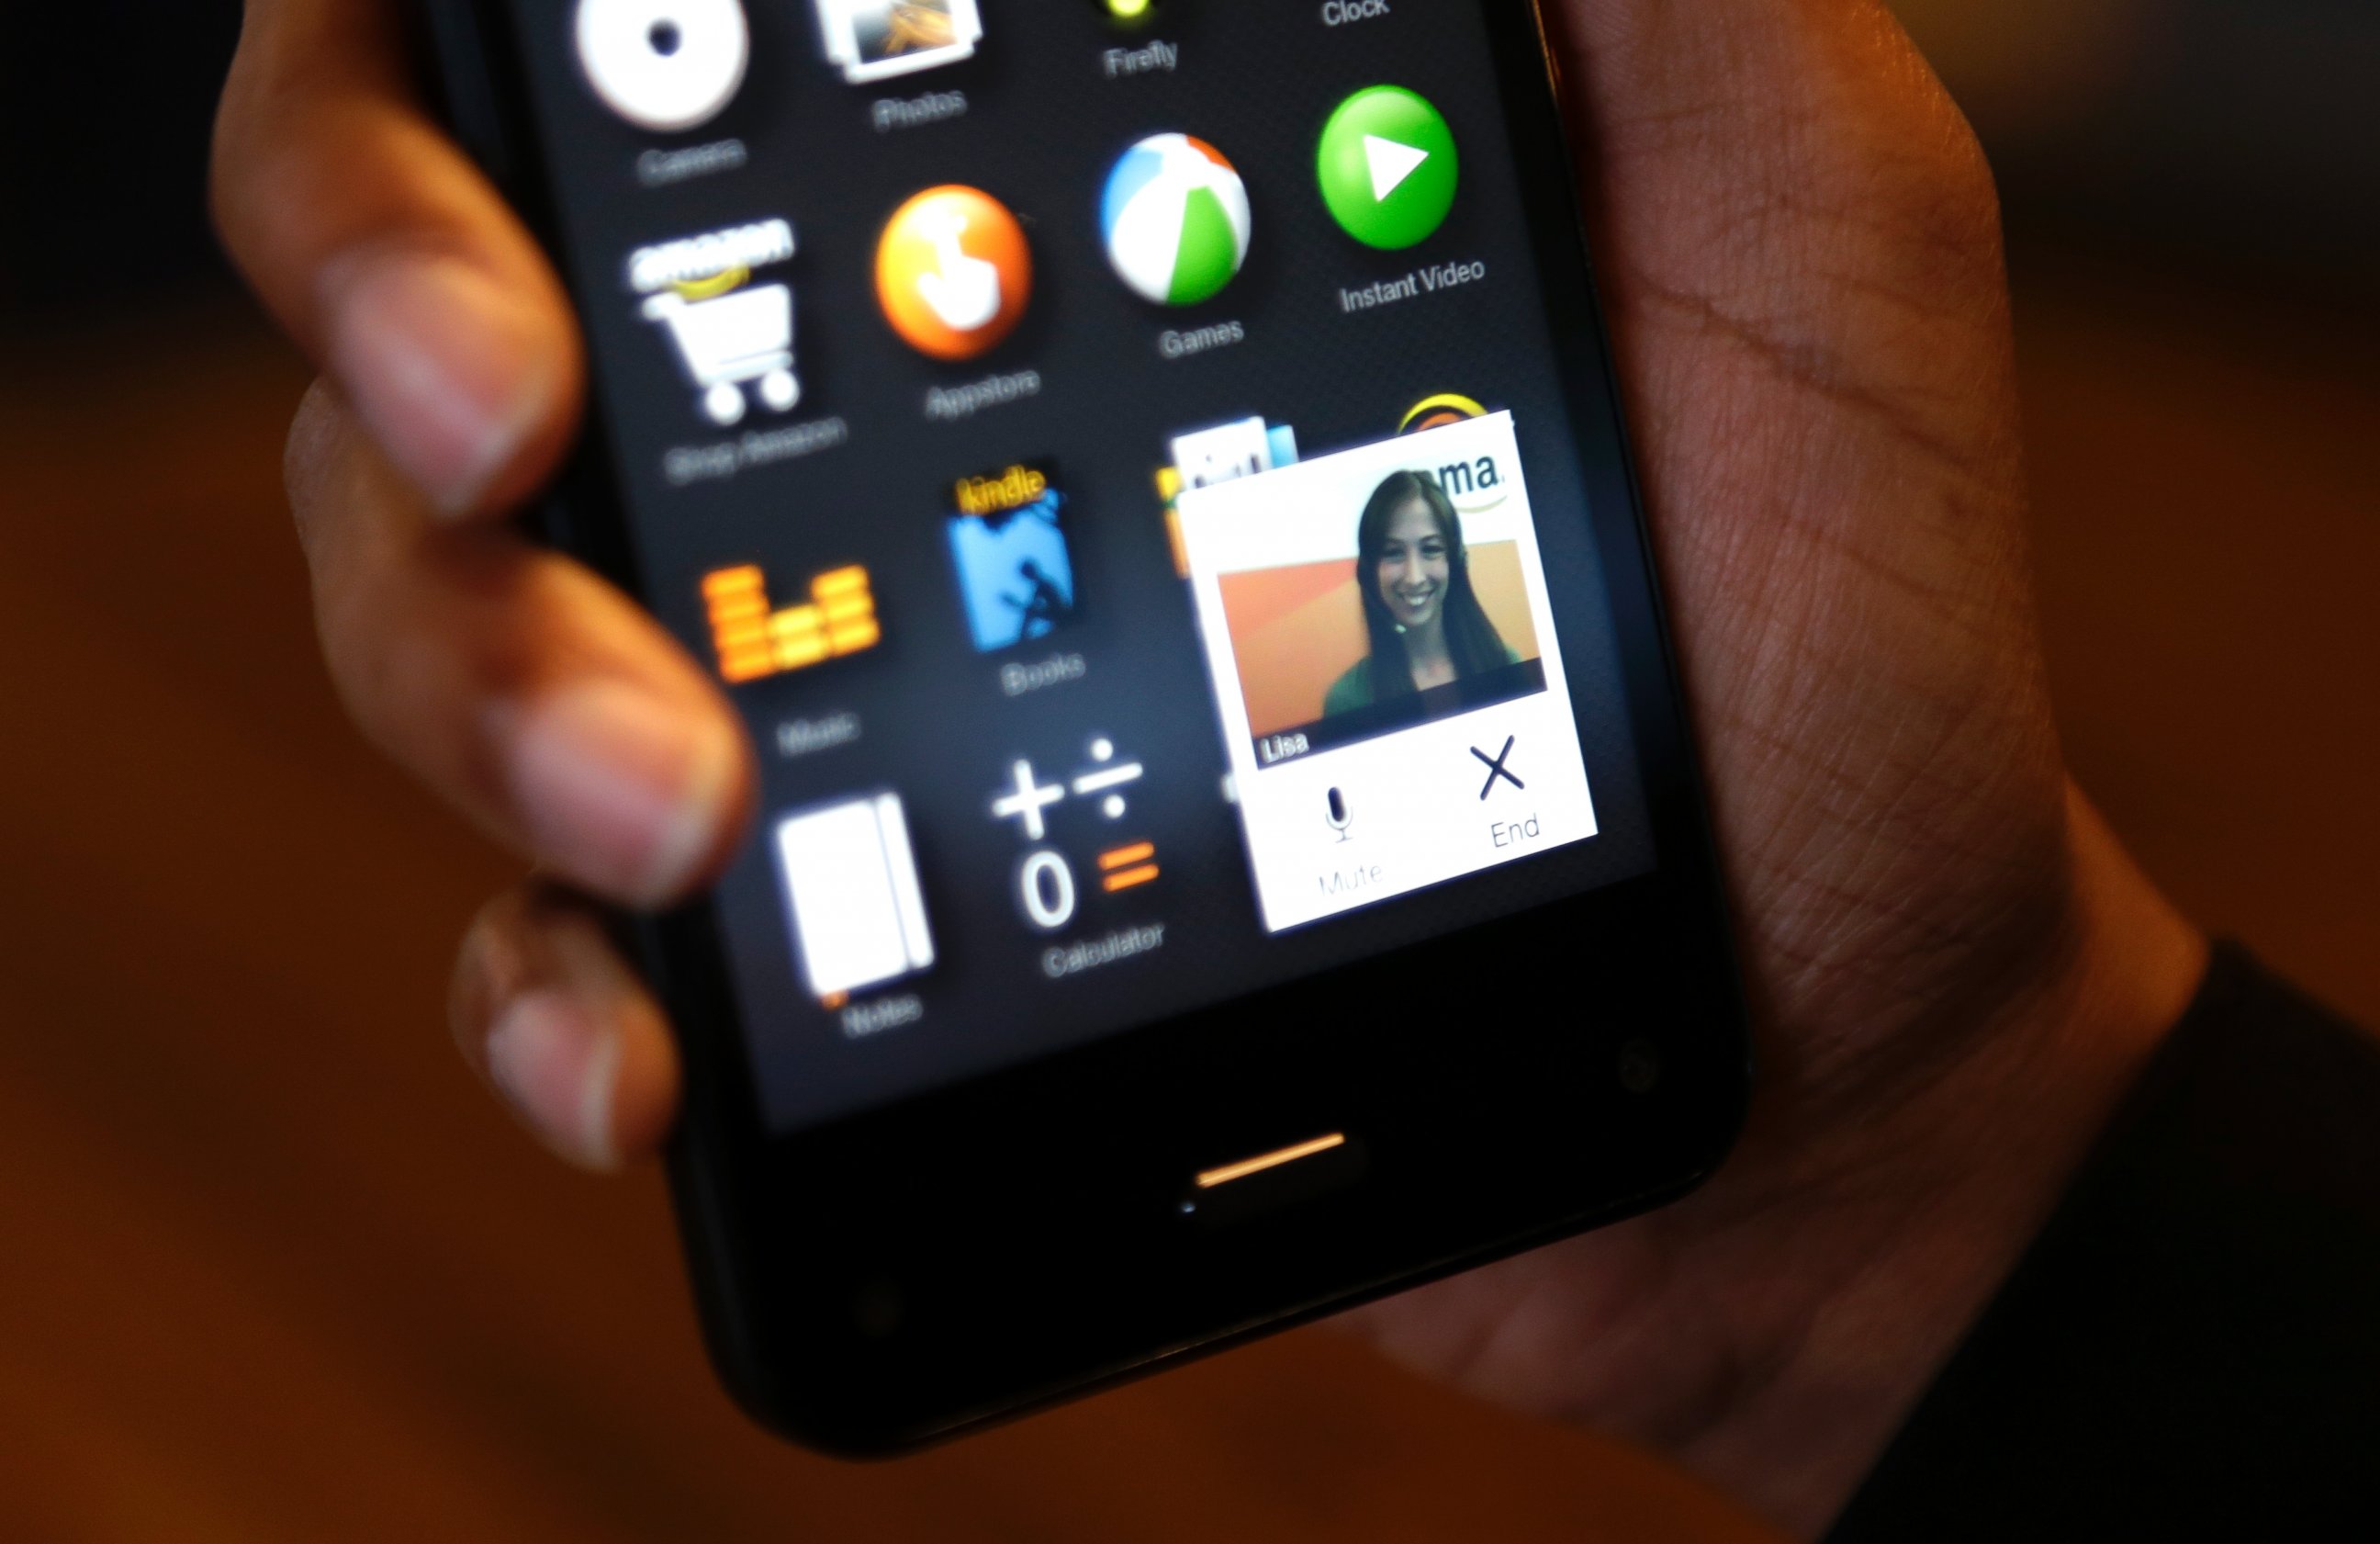 PHOTO: The Amazon "Mayday" customer service app, which provides a direct link to a live Amazon tech support worker, is demonstrated on the Amazon Fire Phone in Seattle on June 18, 2014. 